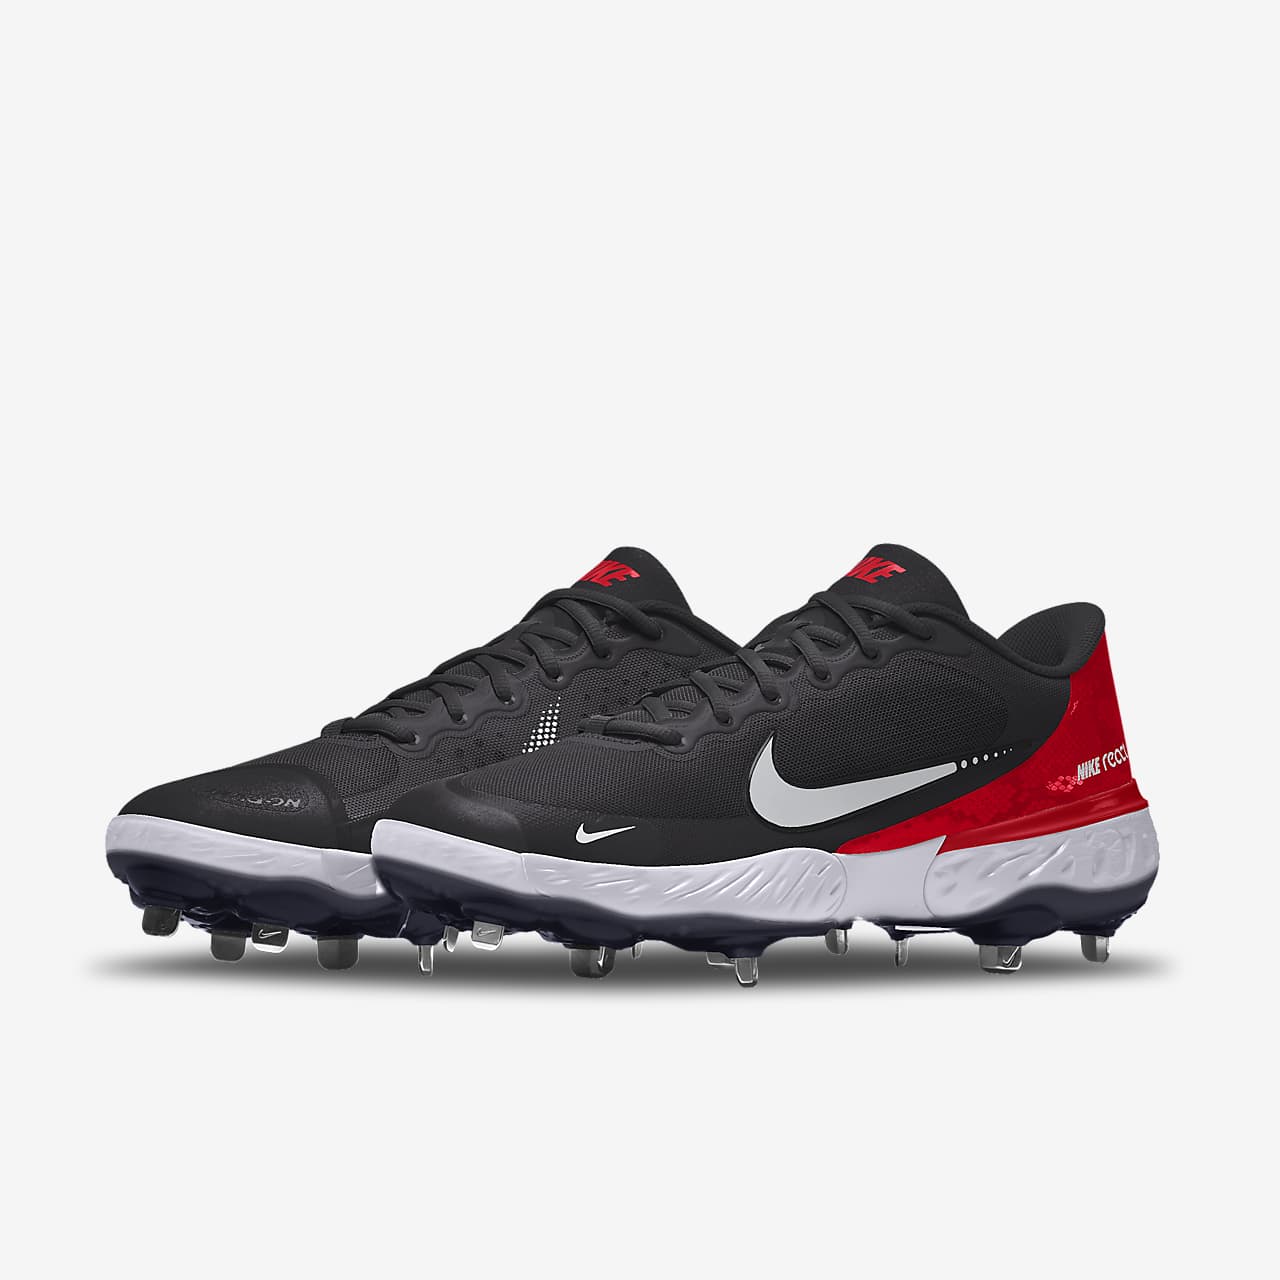 customize your own nike baseball cleats